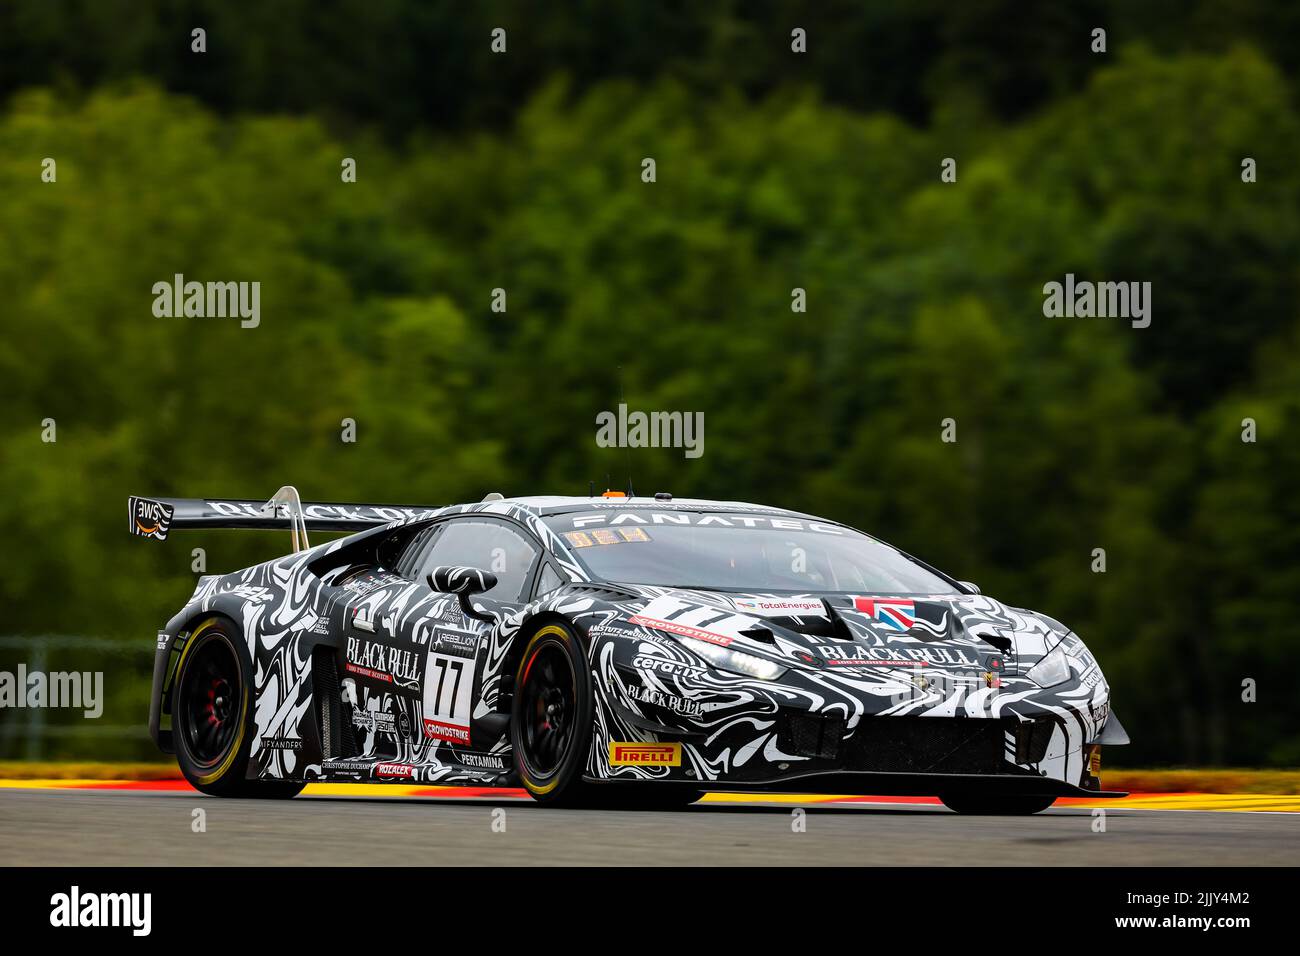 77 Barwell Motorsport, Lamborghini Huracan GT3 Evo of Ahmad AL HARTHY, Sam  DE HAAN, Alex MACDOWALL, Sandy MITCHELL, in action during the TotalEnergies  24 hours of Spa 2022, 7th round of the